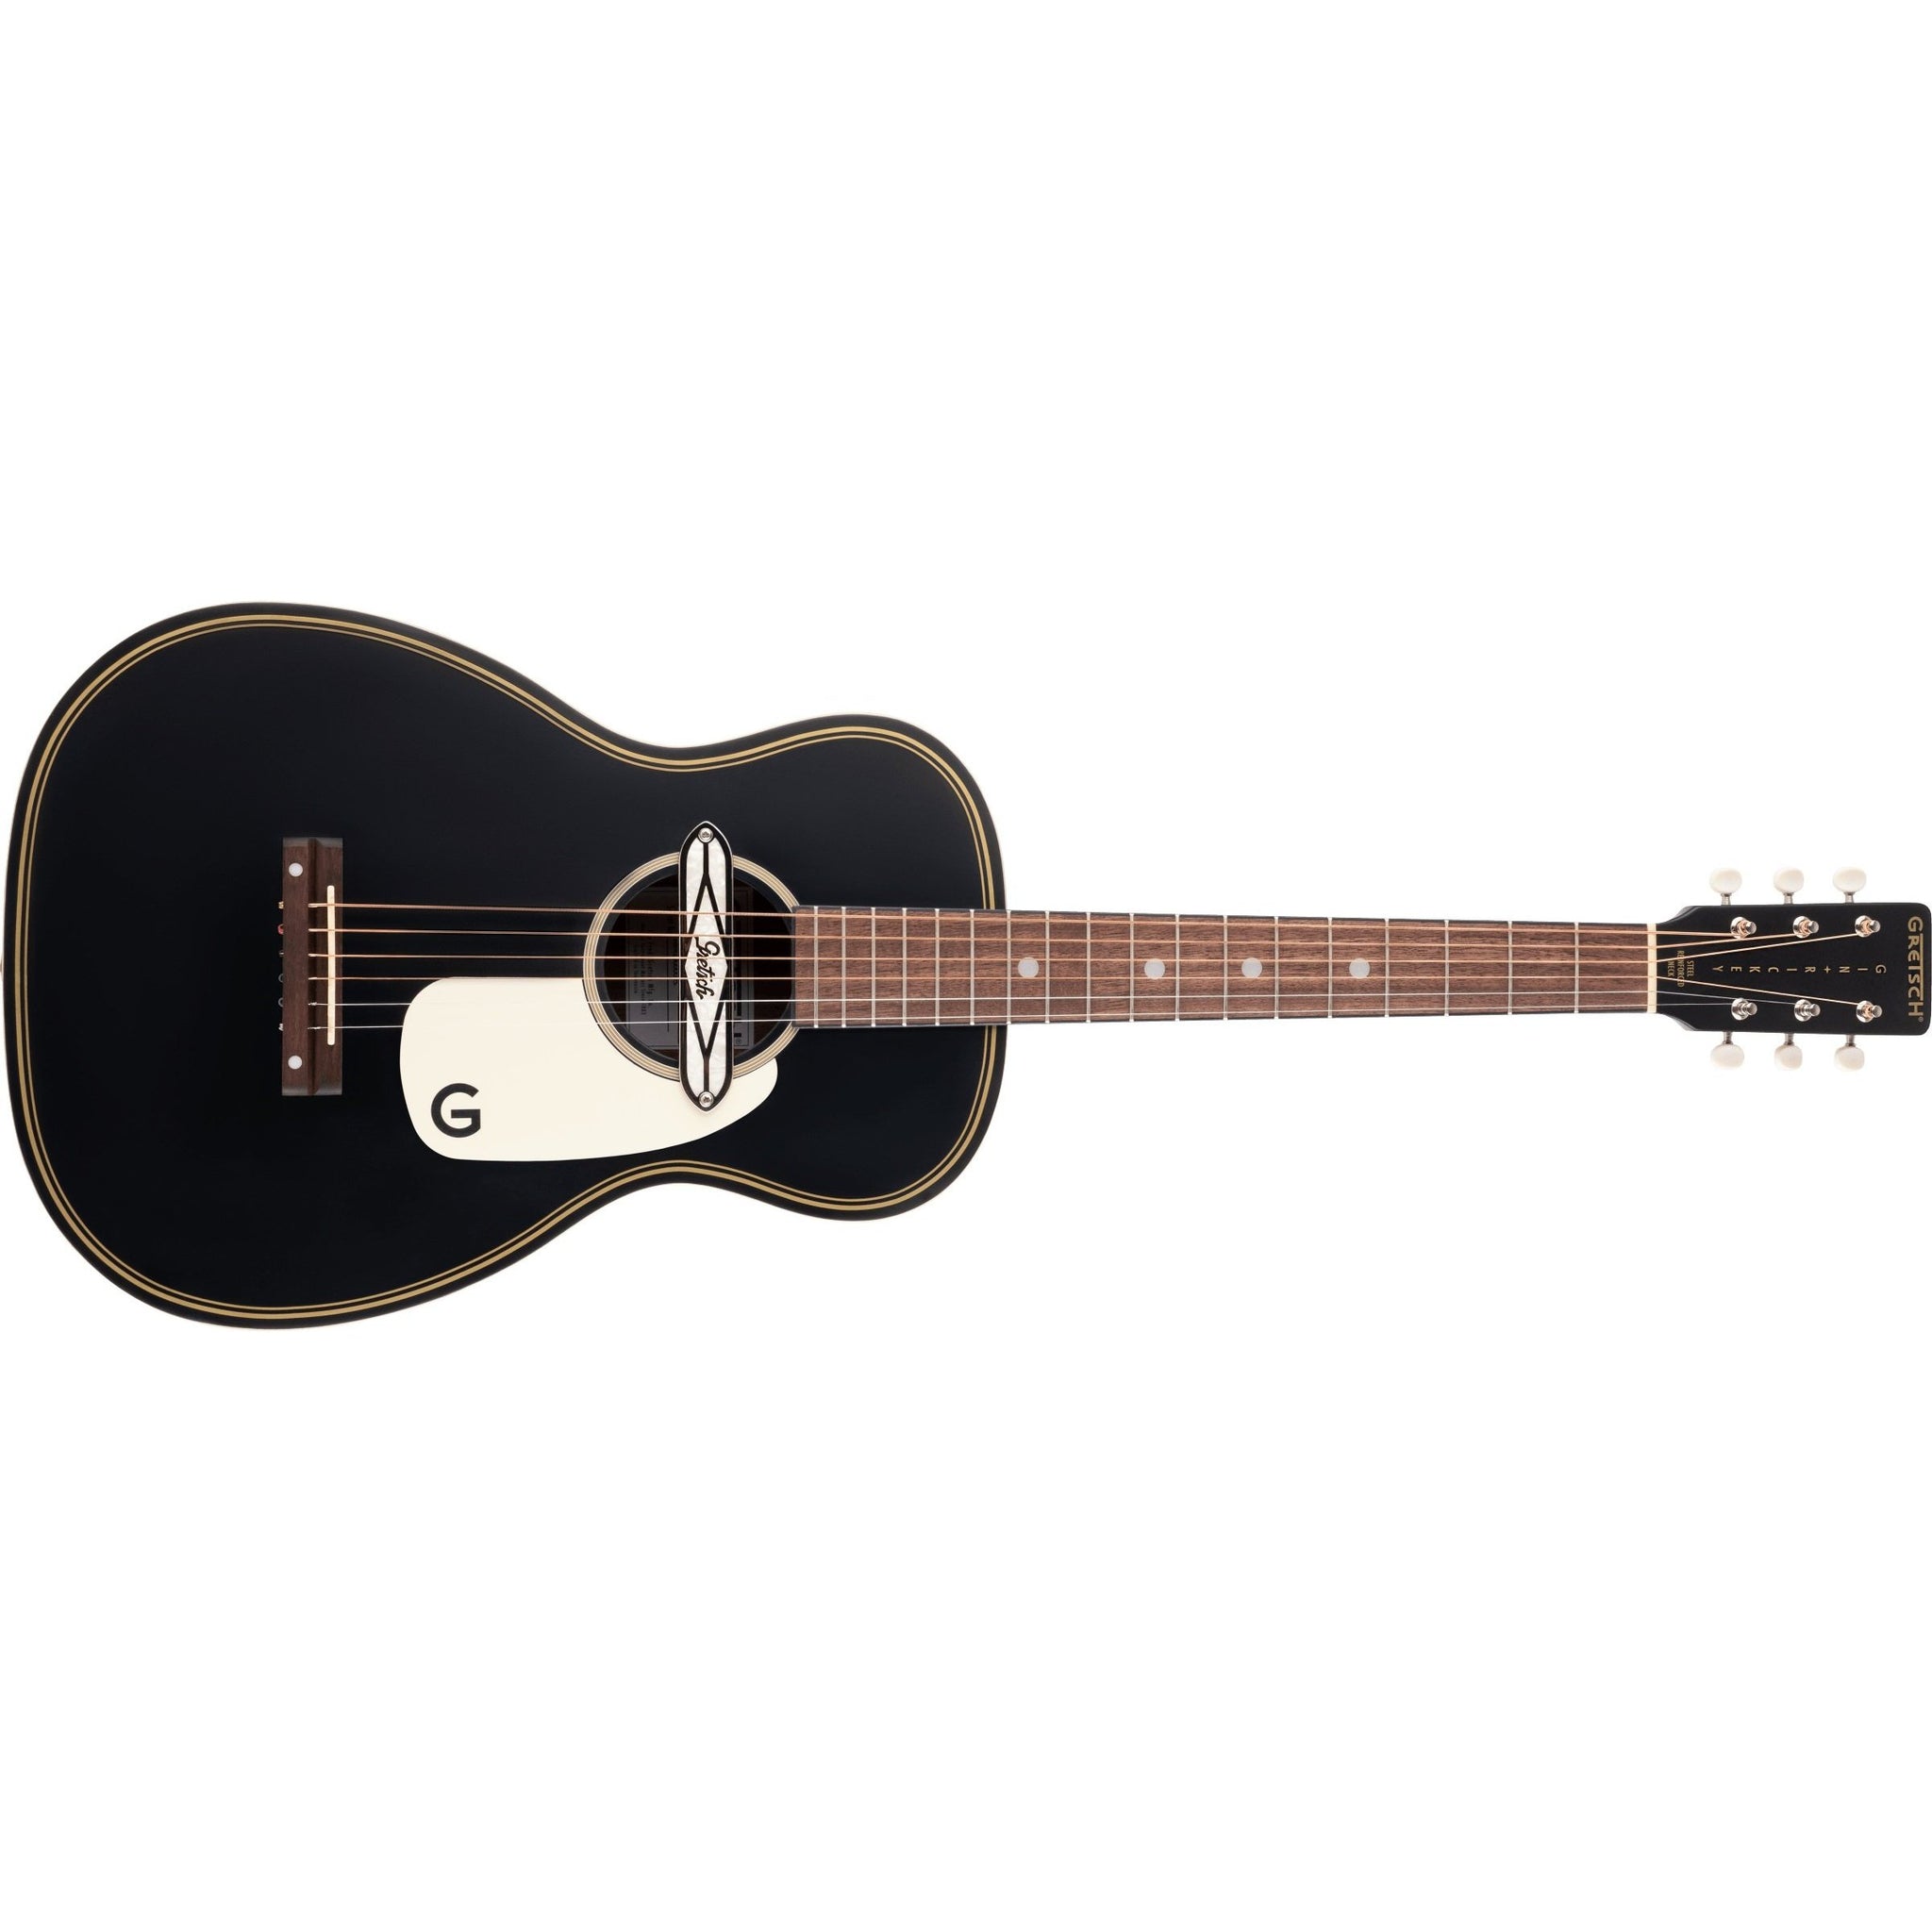 Gretsch G9520E Gin Rickey Acoustic/Electric Guitar with Soundhole Pickup-Smokestack Black-Music World Academy